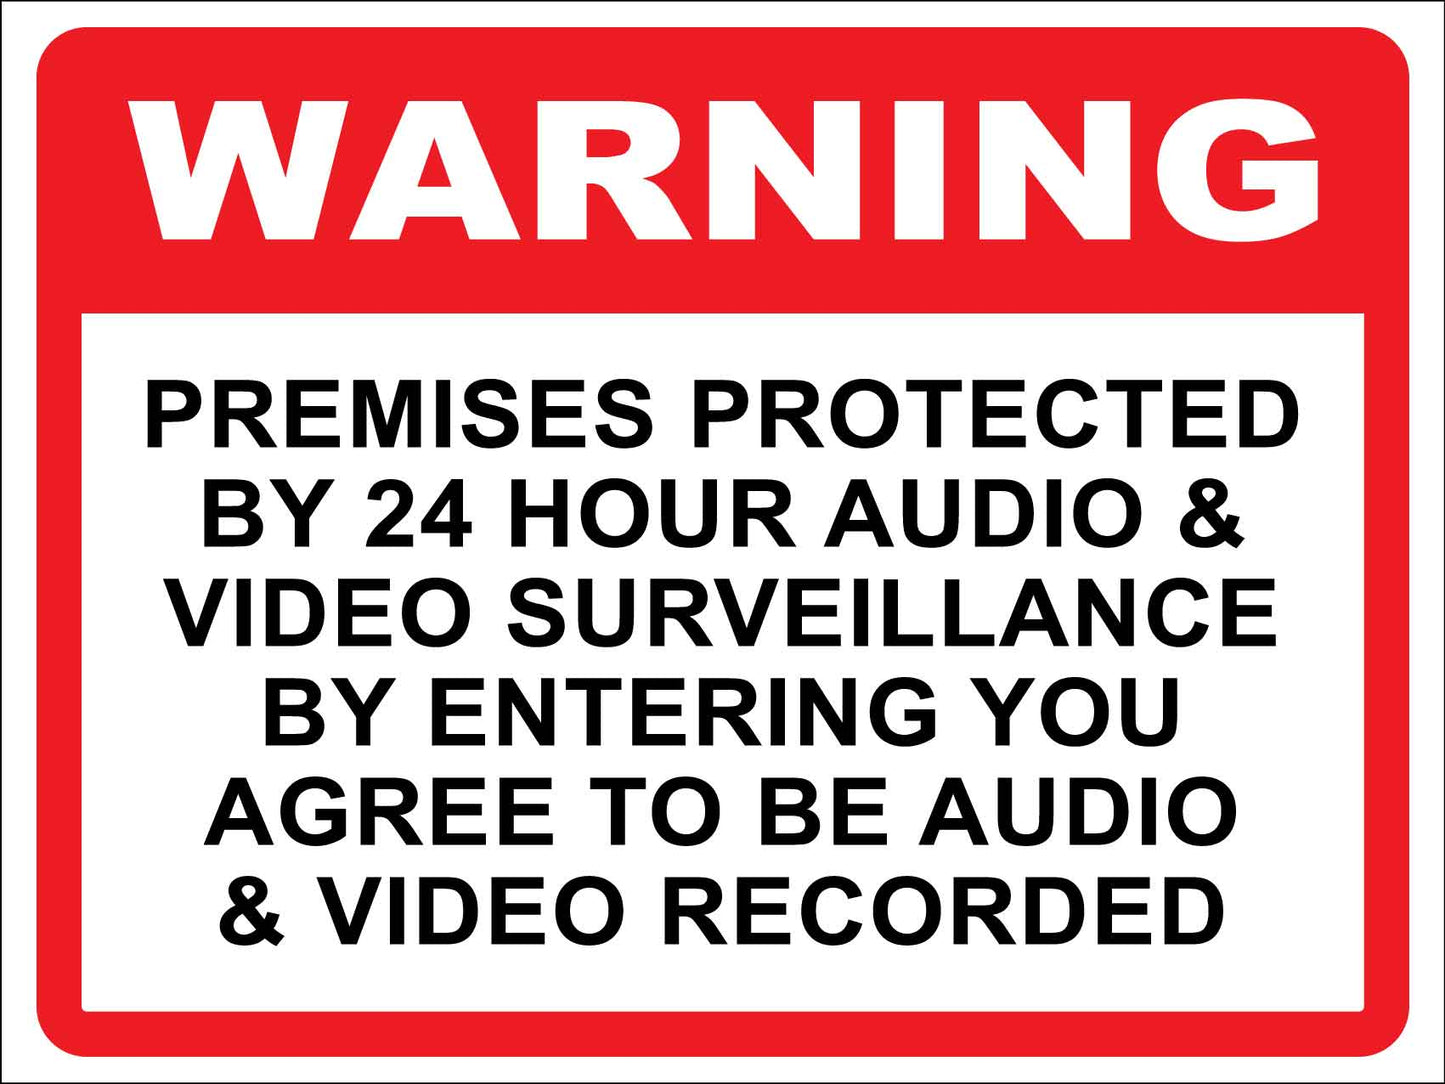 Warning Premises Protected By 24 Hour Audio & Video Surveillance Sign